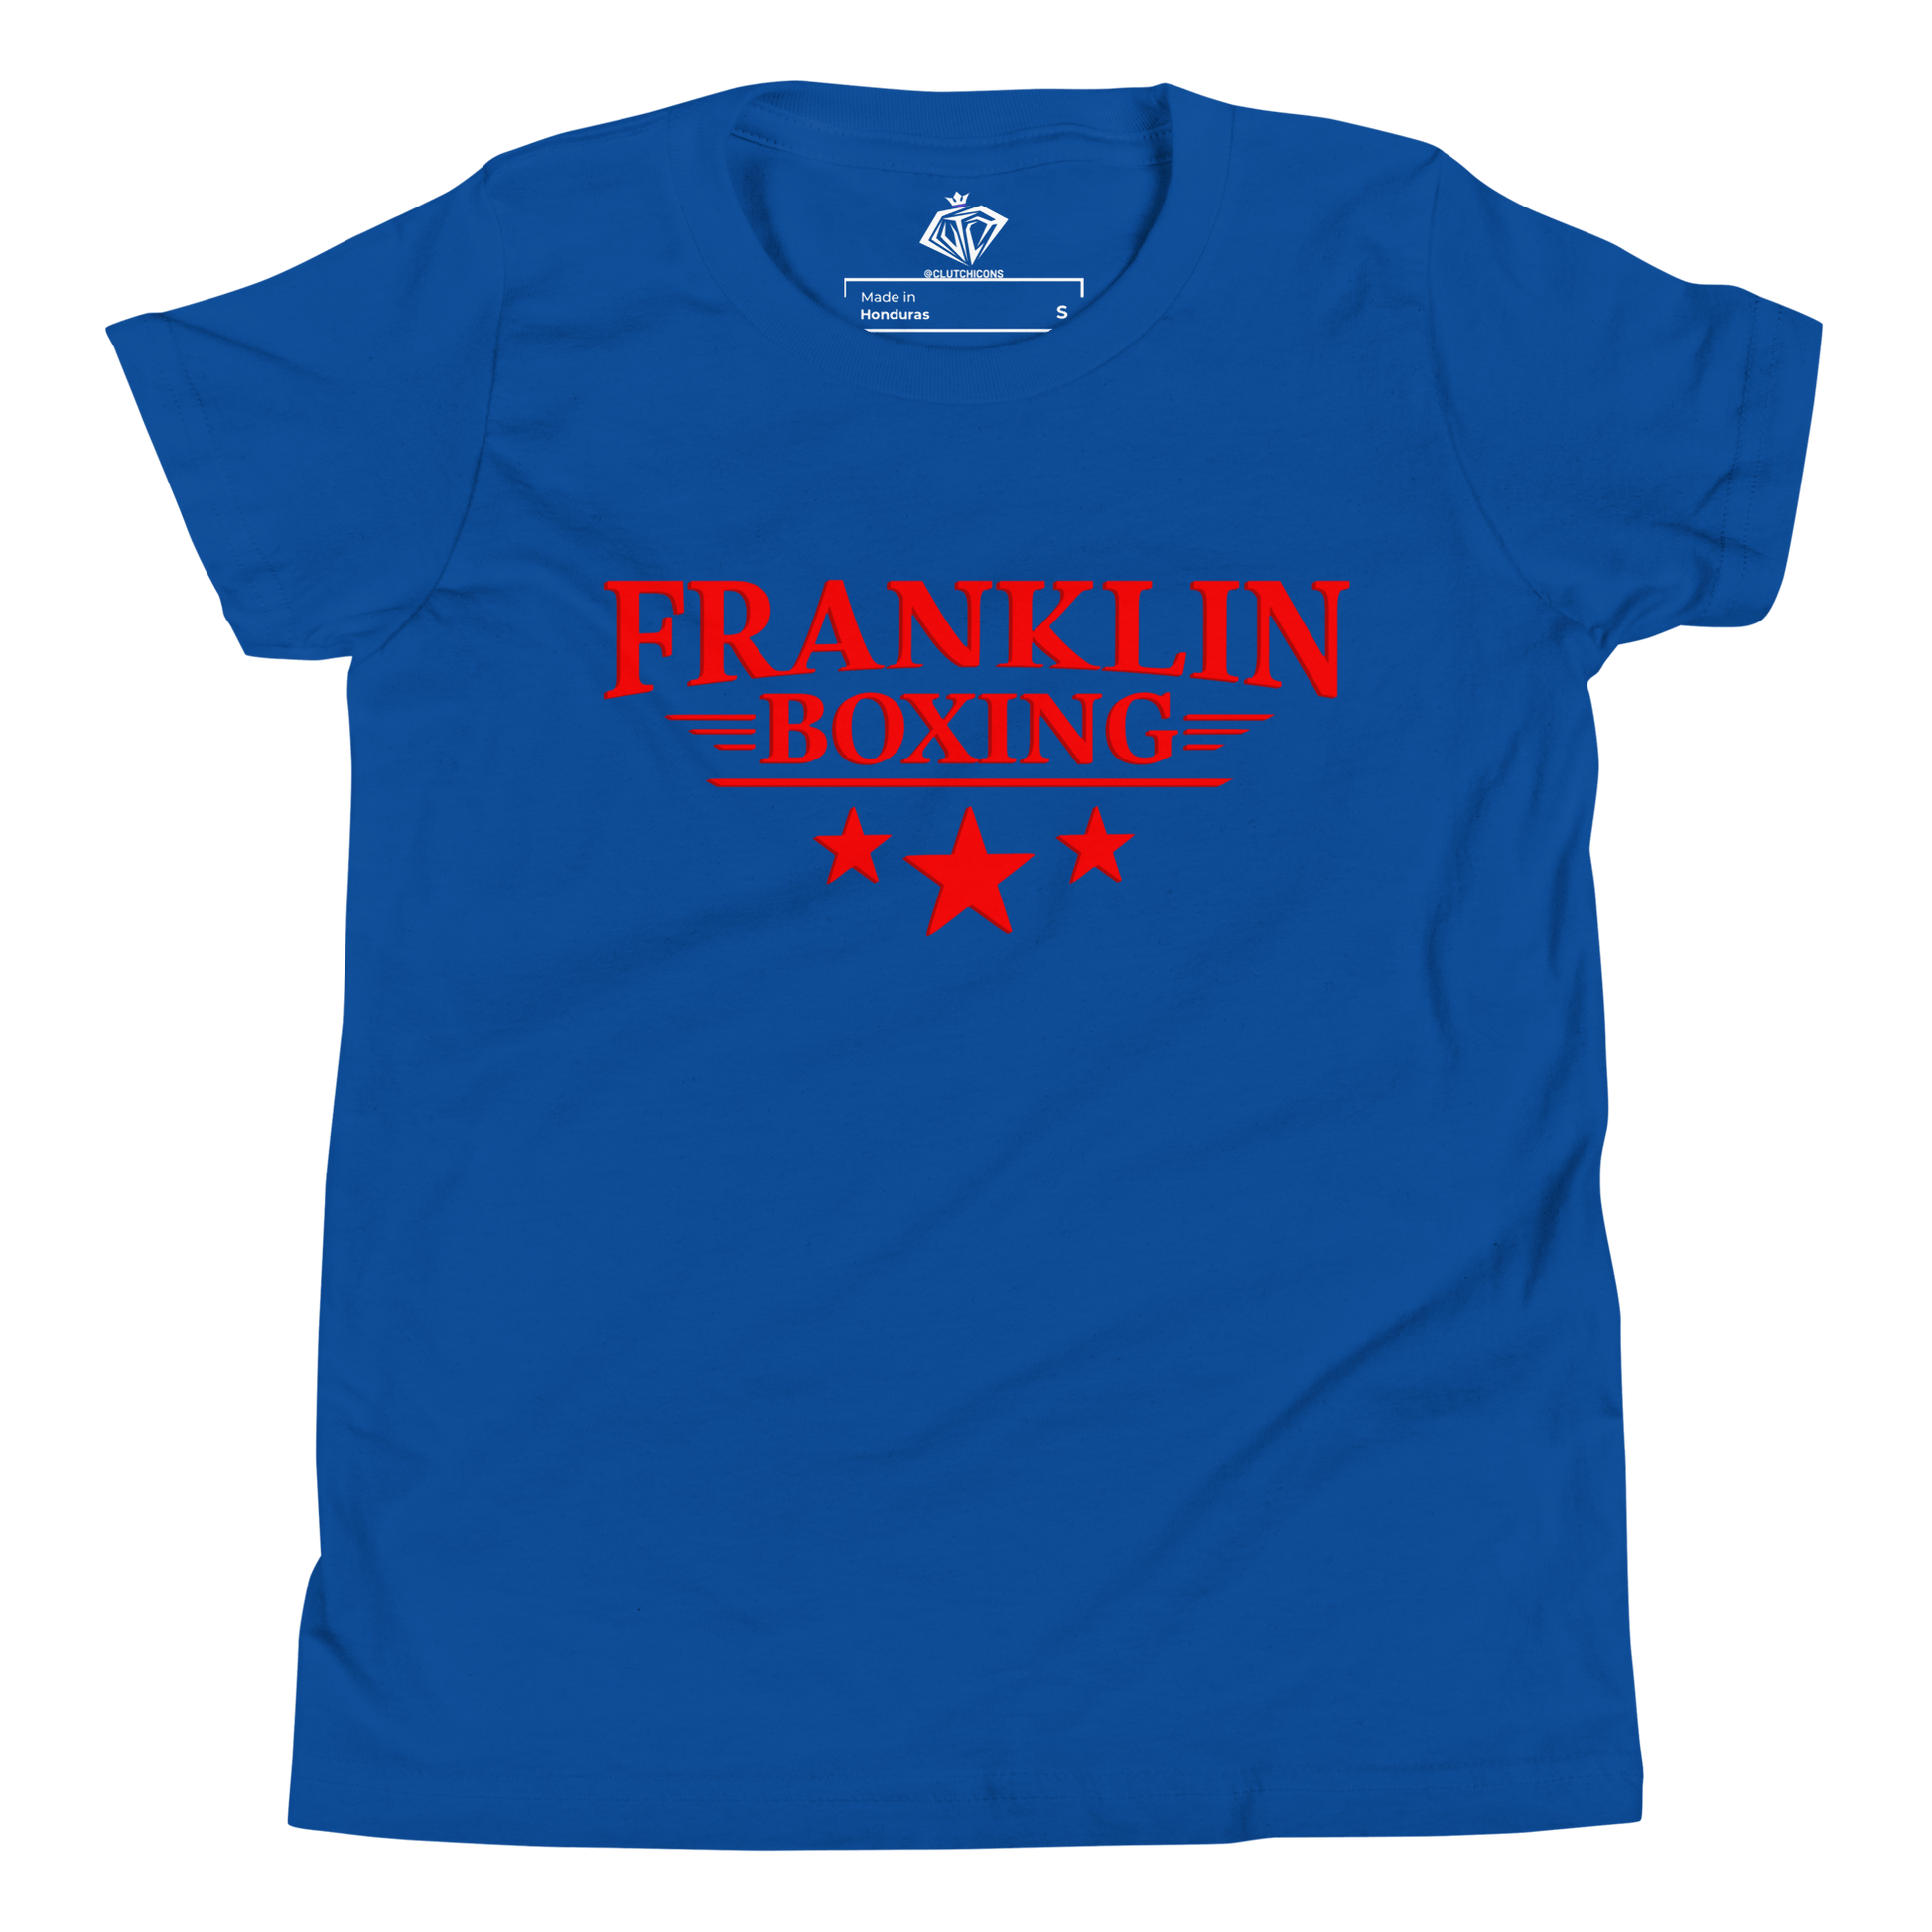 Franklin Boxing | Youth Red Staple Cotton Shirt - Clutch -